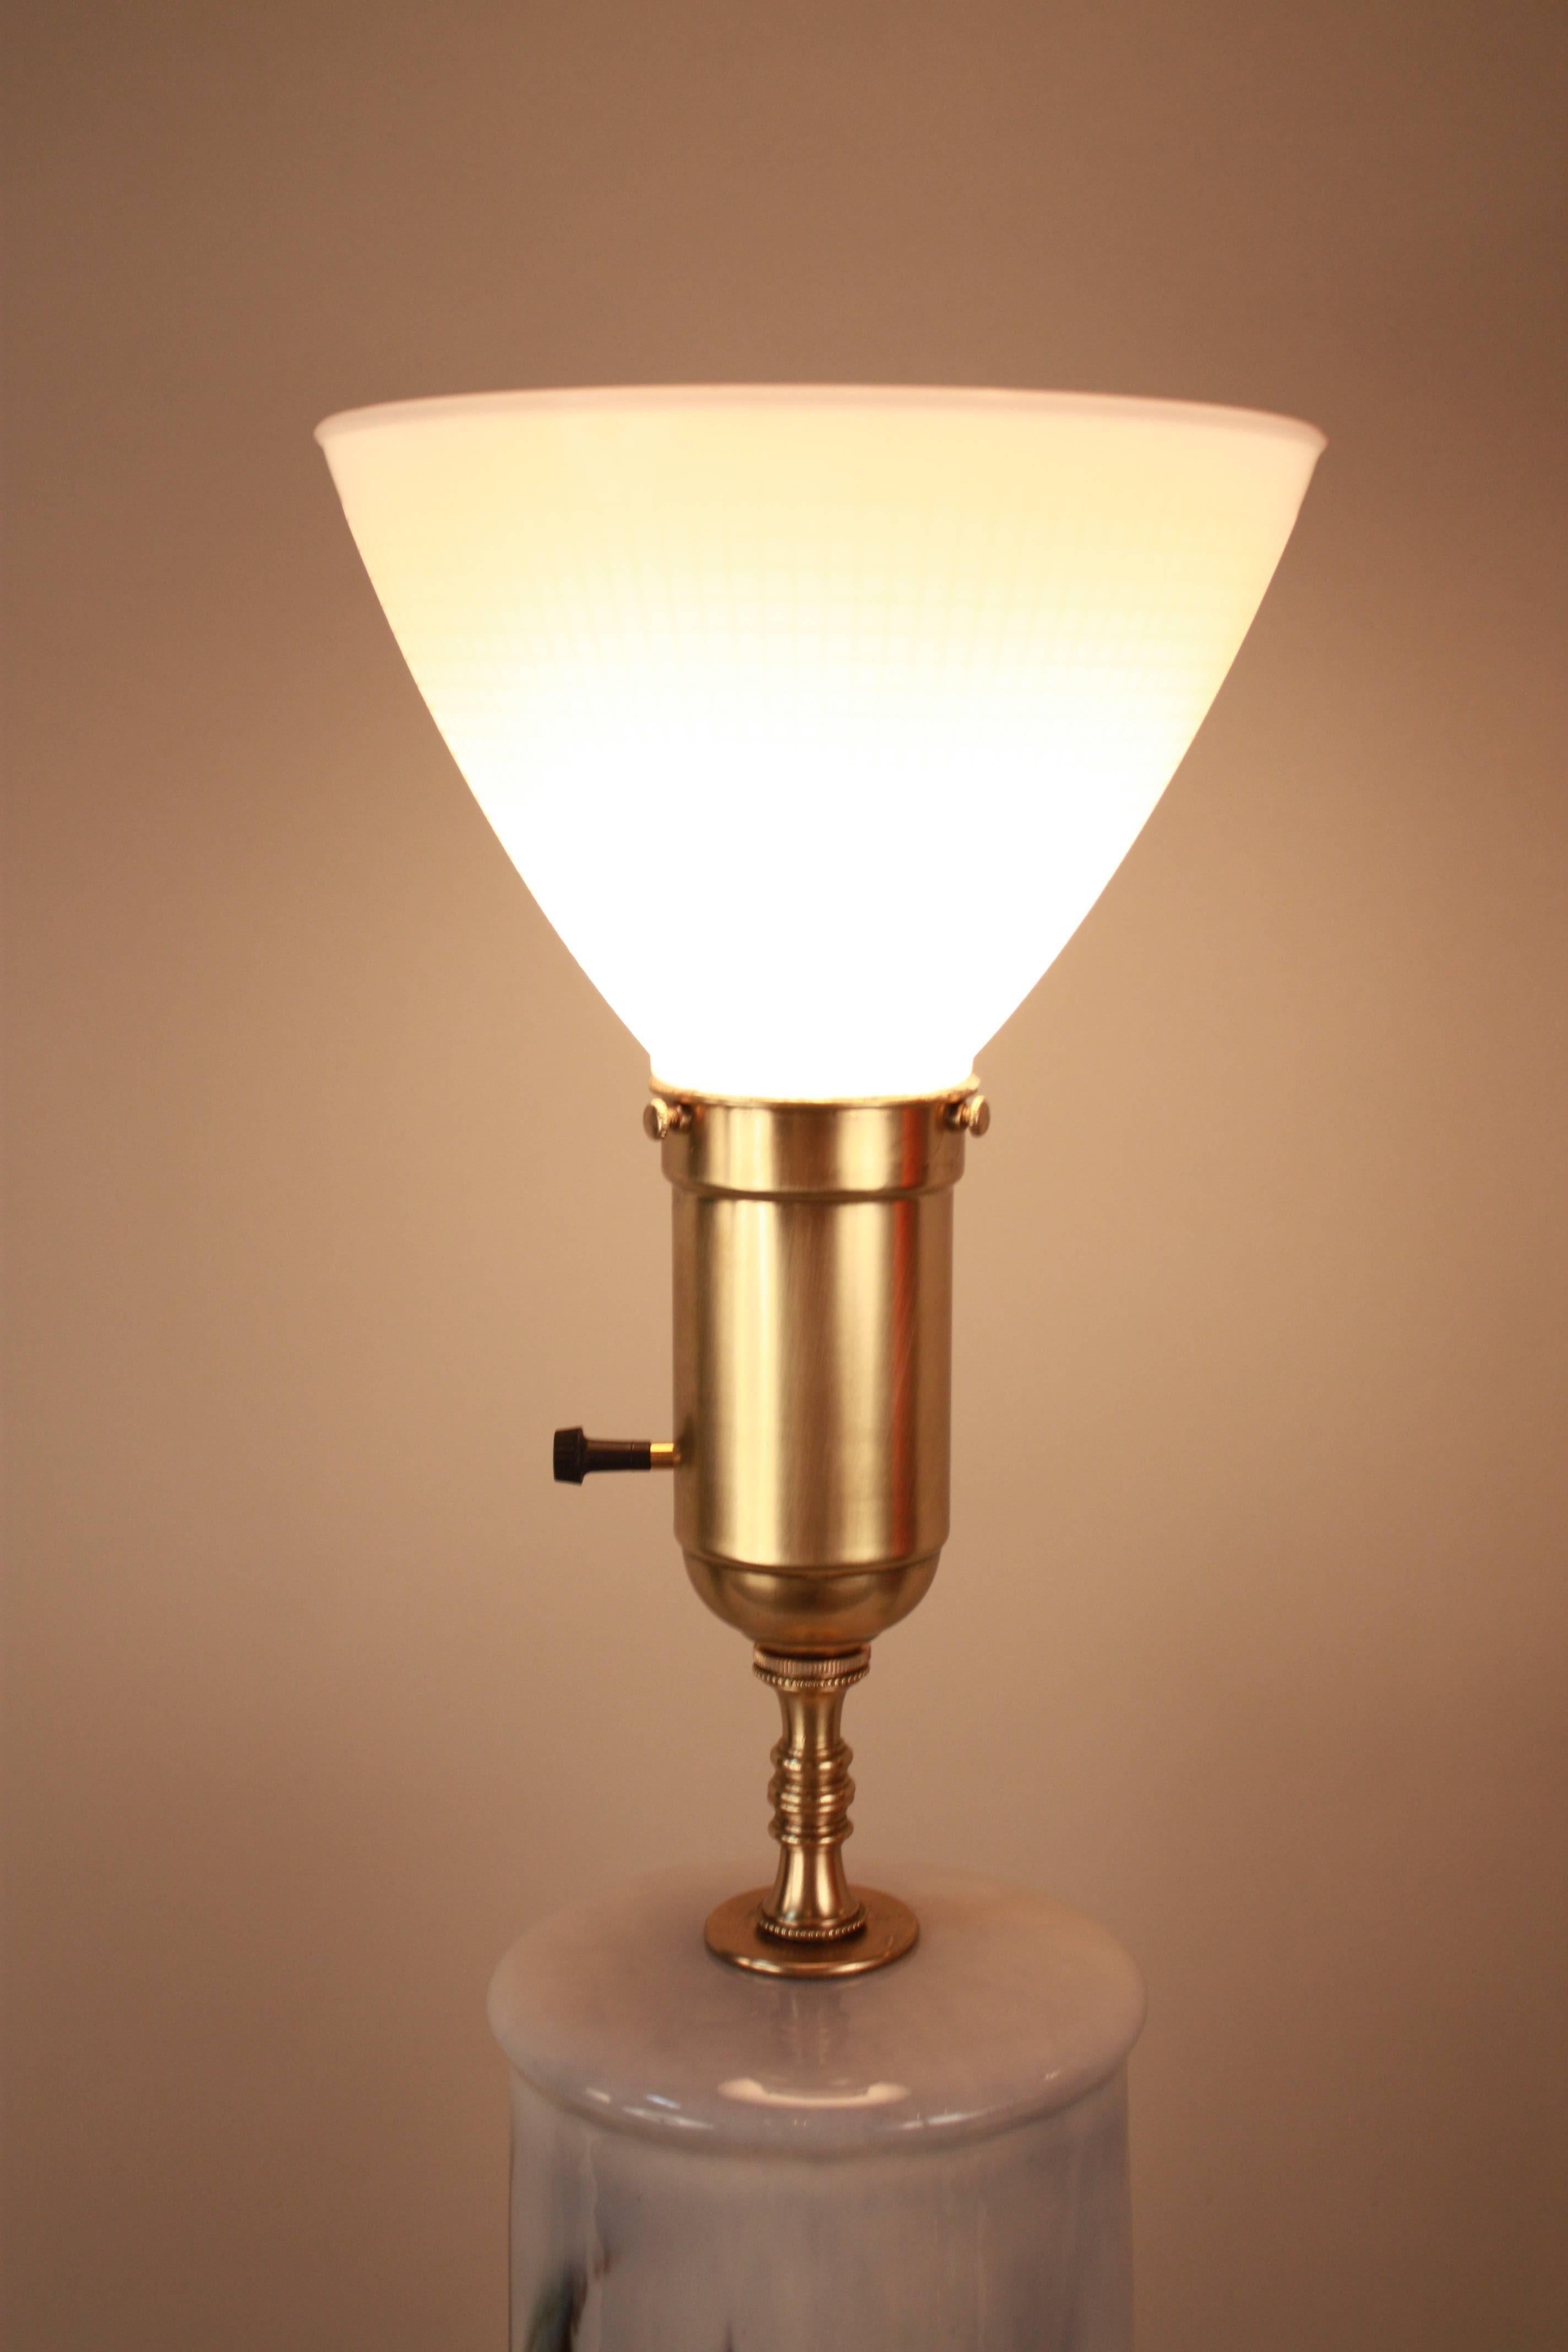 Mid-20th Century American Midcentury Pottery Table Lamp -2